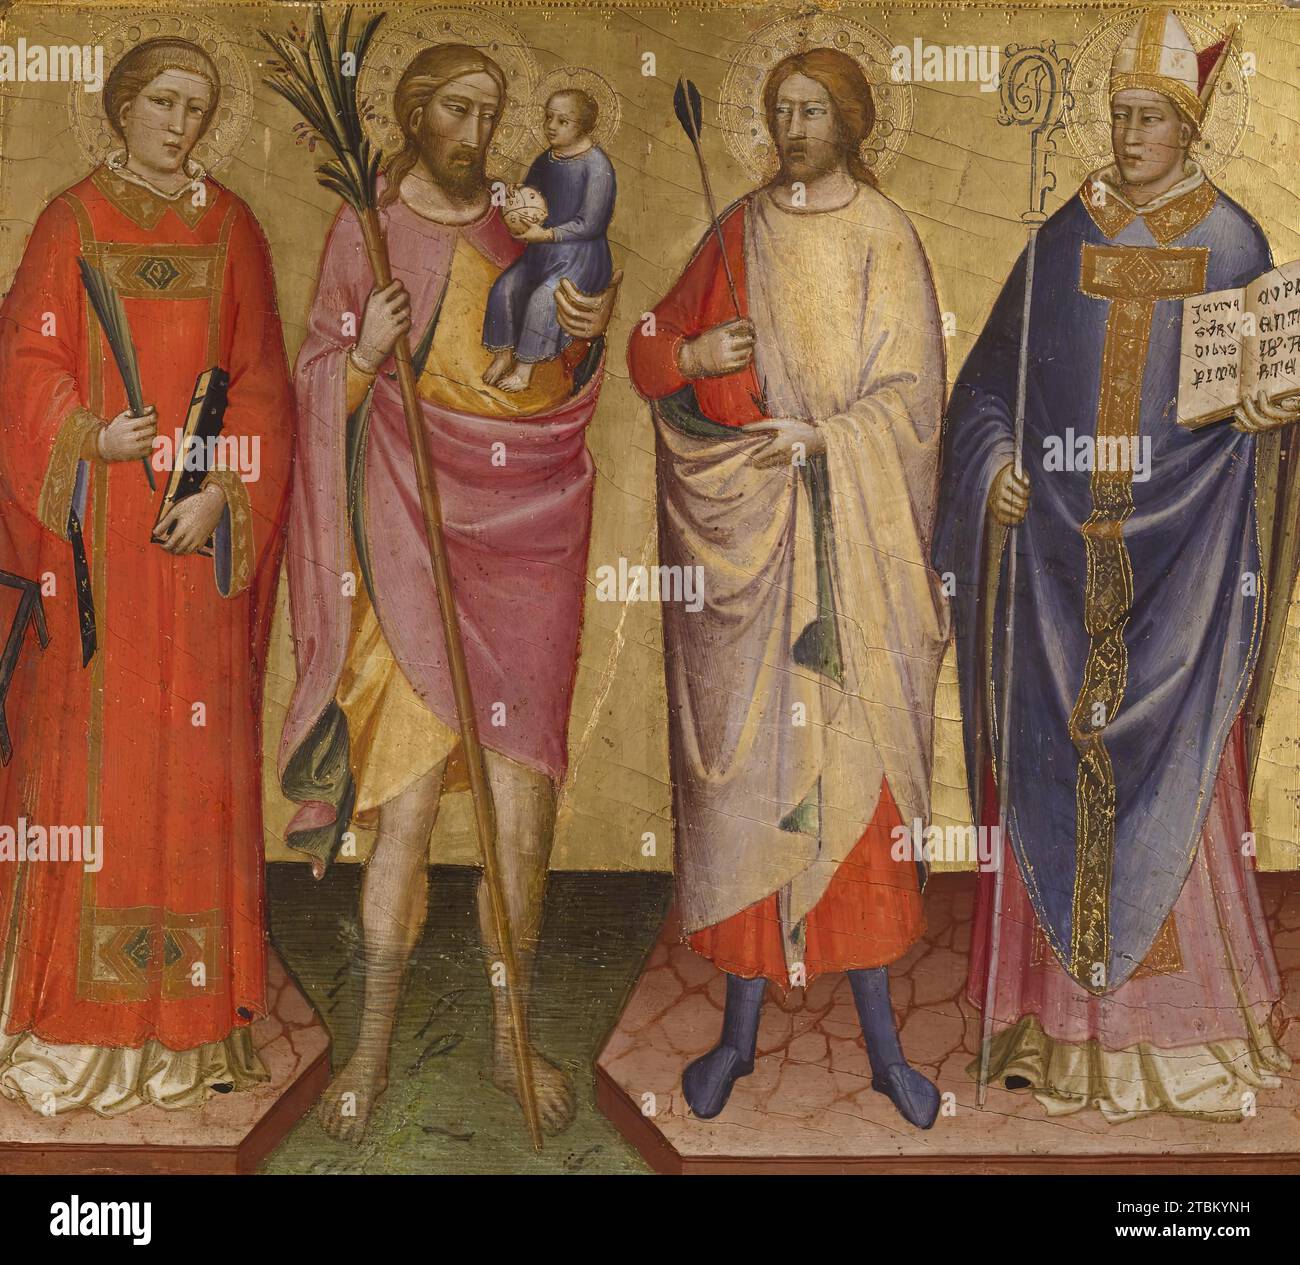 Saints Lawrence, Christopher, Sebastian, and a Bishop Saint, 1420-1430. This painting is one of a series of similar panels that perhaps once formed the wings of a painted reliquary. The relics contained therein would have been those of the saints portrayed on the wings. On this panel, St. Lawrence and St. Sebastian are identified by the instruments of their martyrdom: the gridiron for Lawrence and the arrow for Sebastian. St. Christopher is portrayed ferrying the Christ child across the river as dictated by his legend. Stock Photo